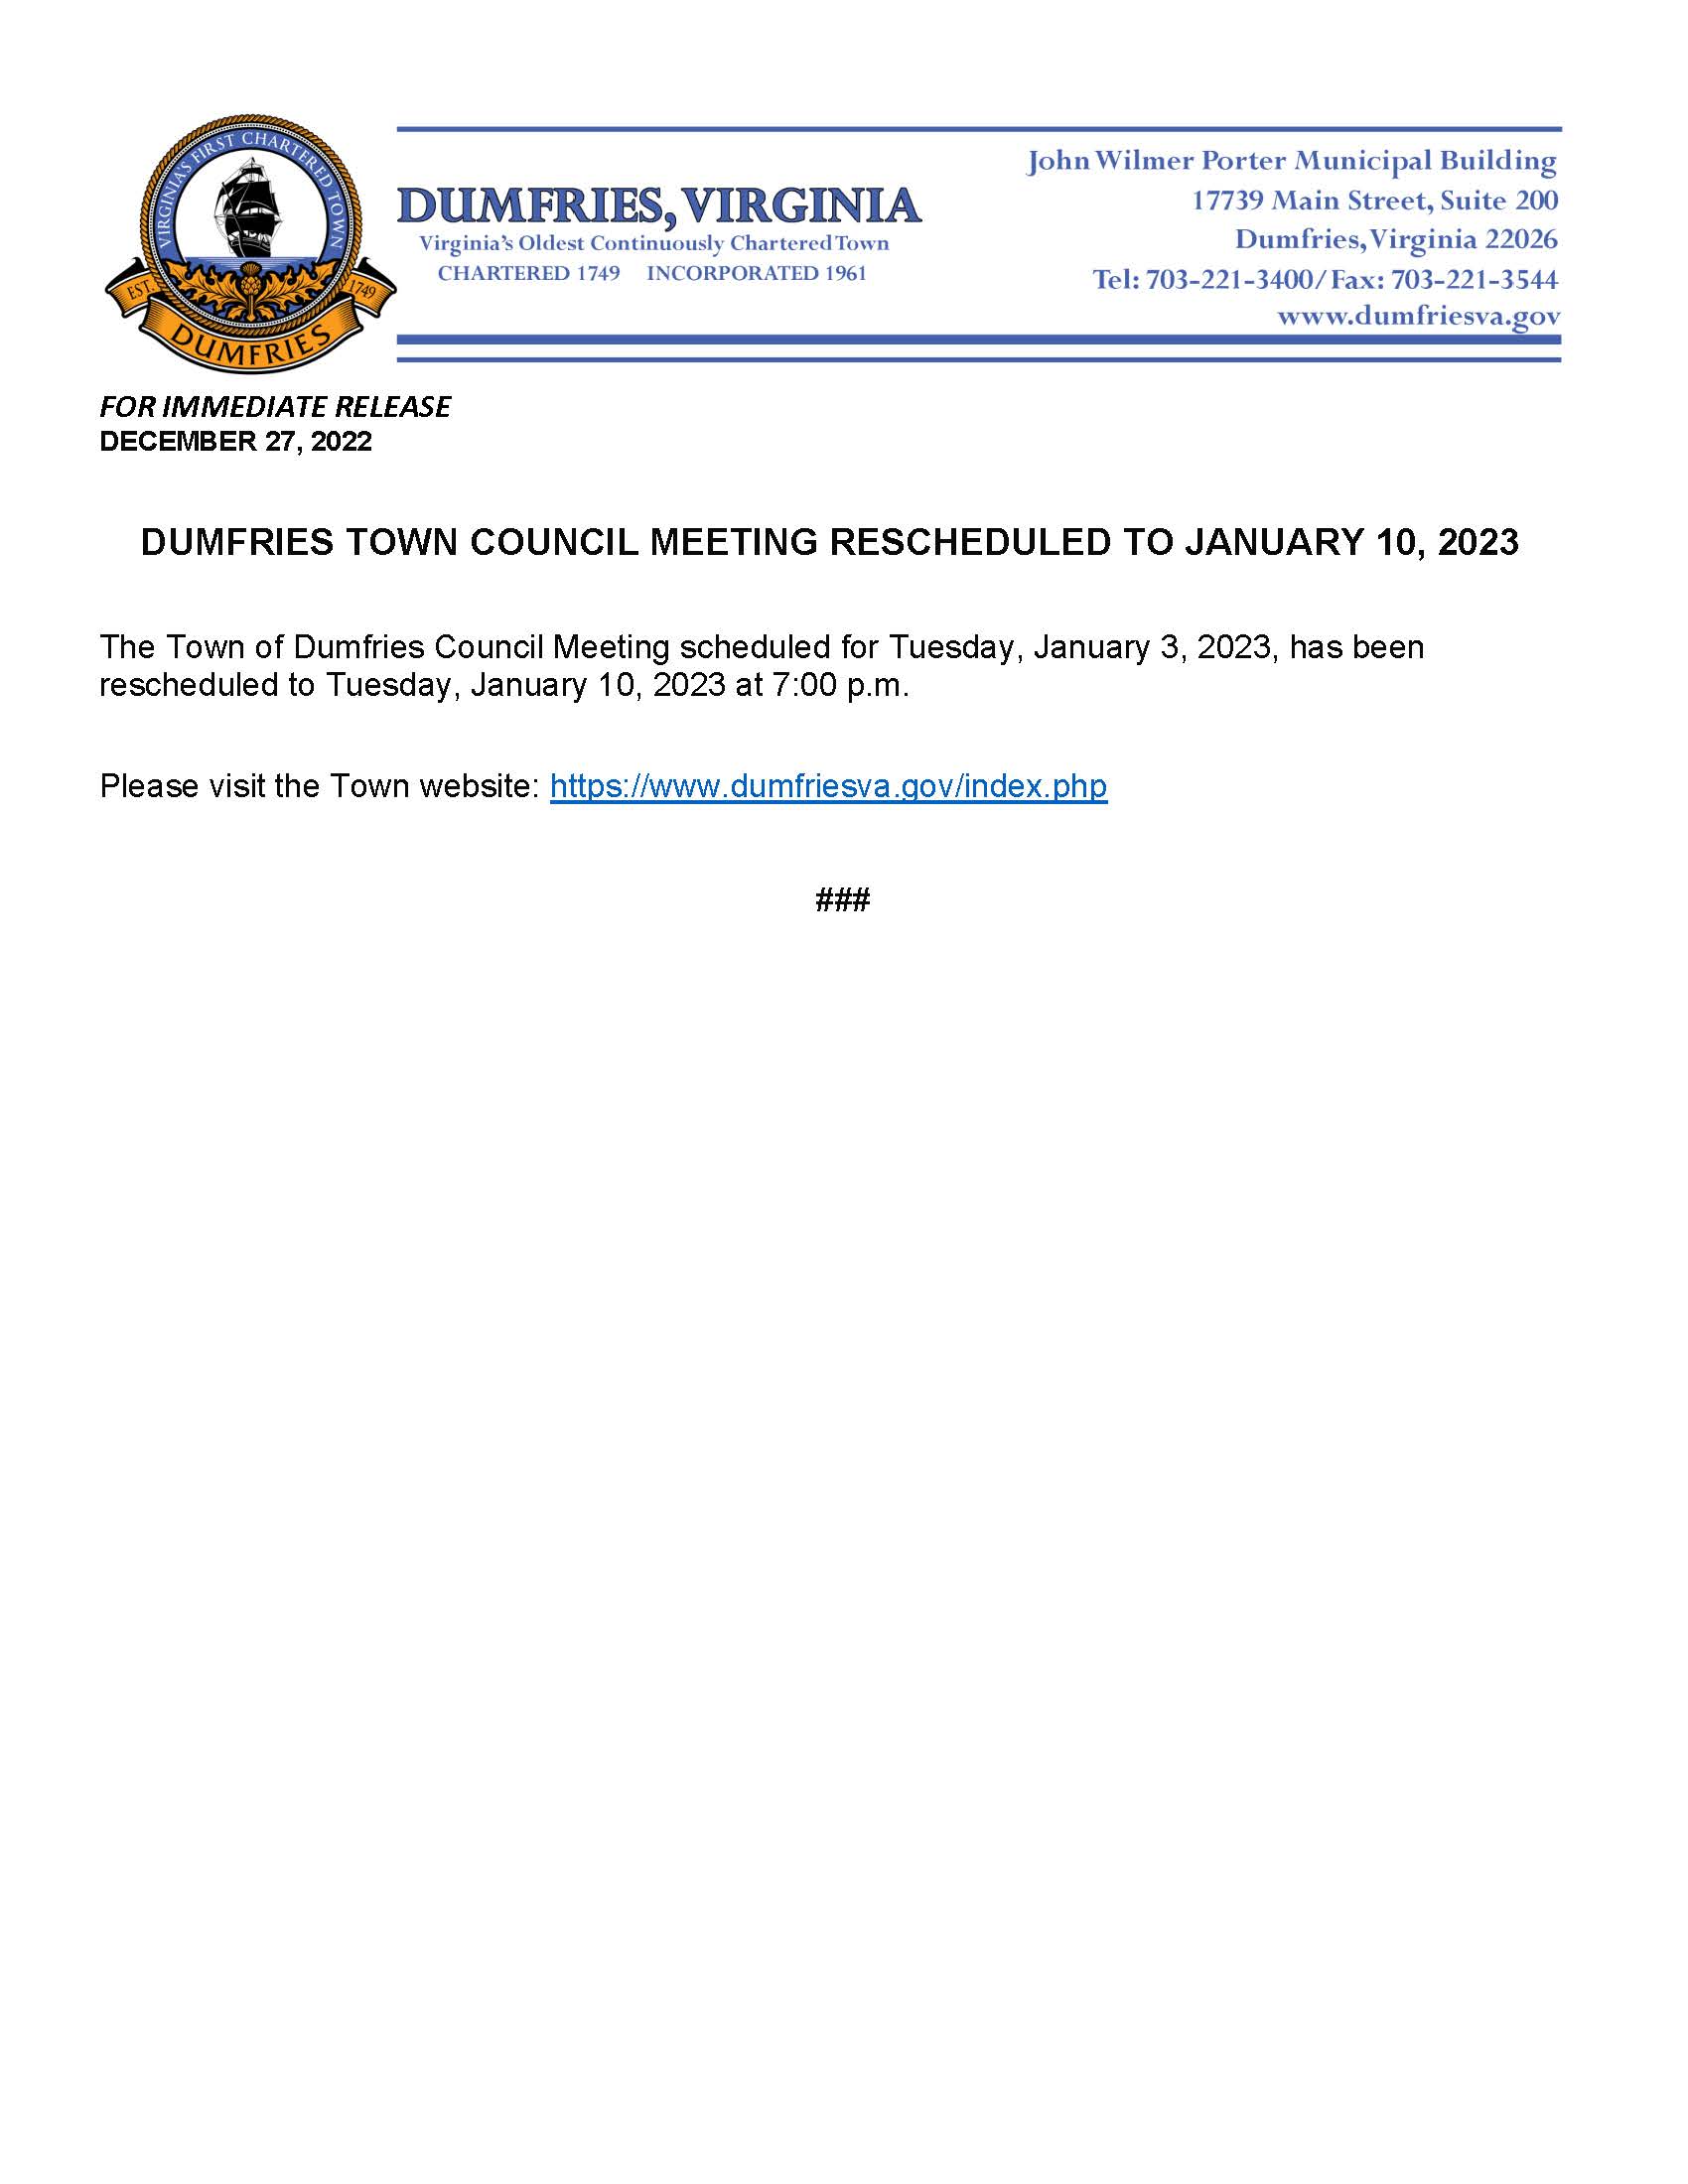 Town Council Meeting Rescheduled 01032023 to 01102023